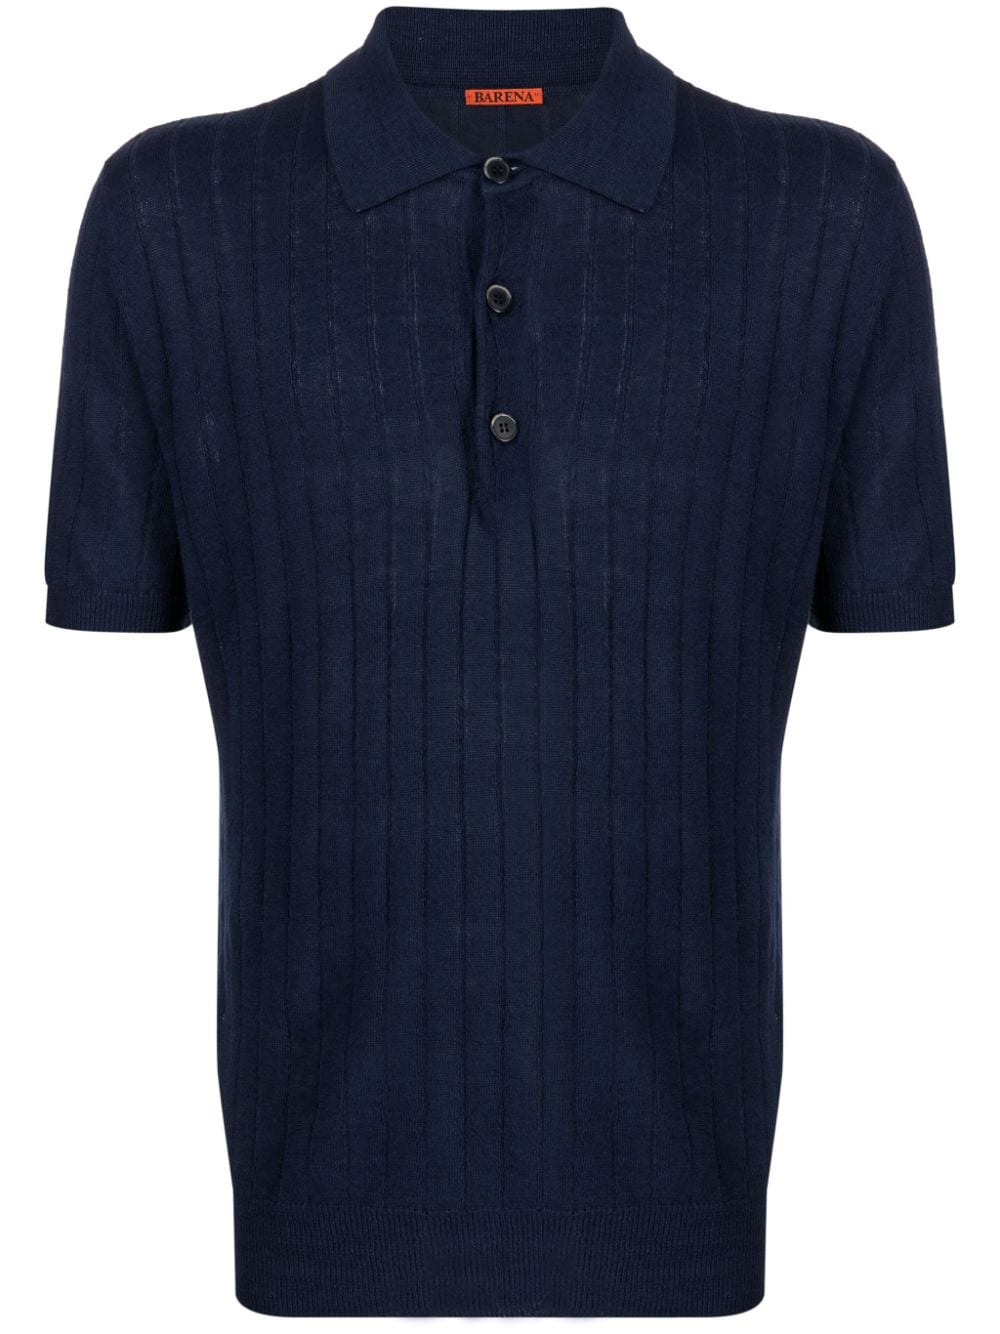 Navy blue knitted polo shirt